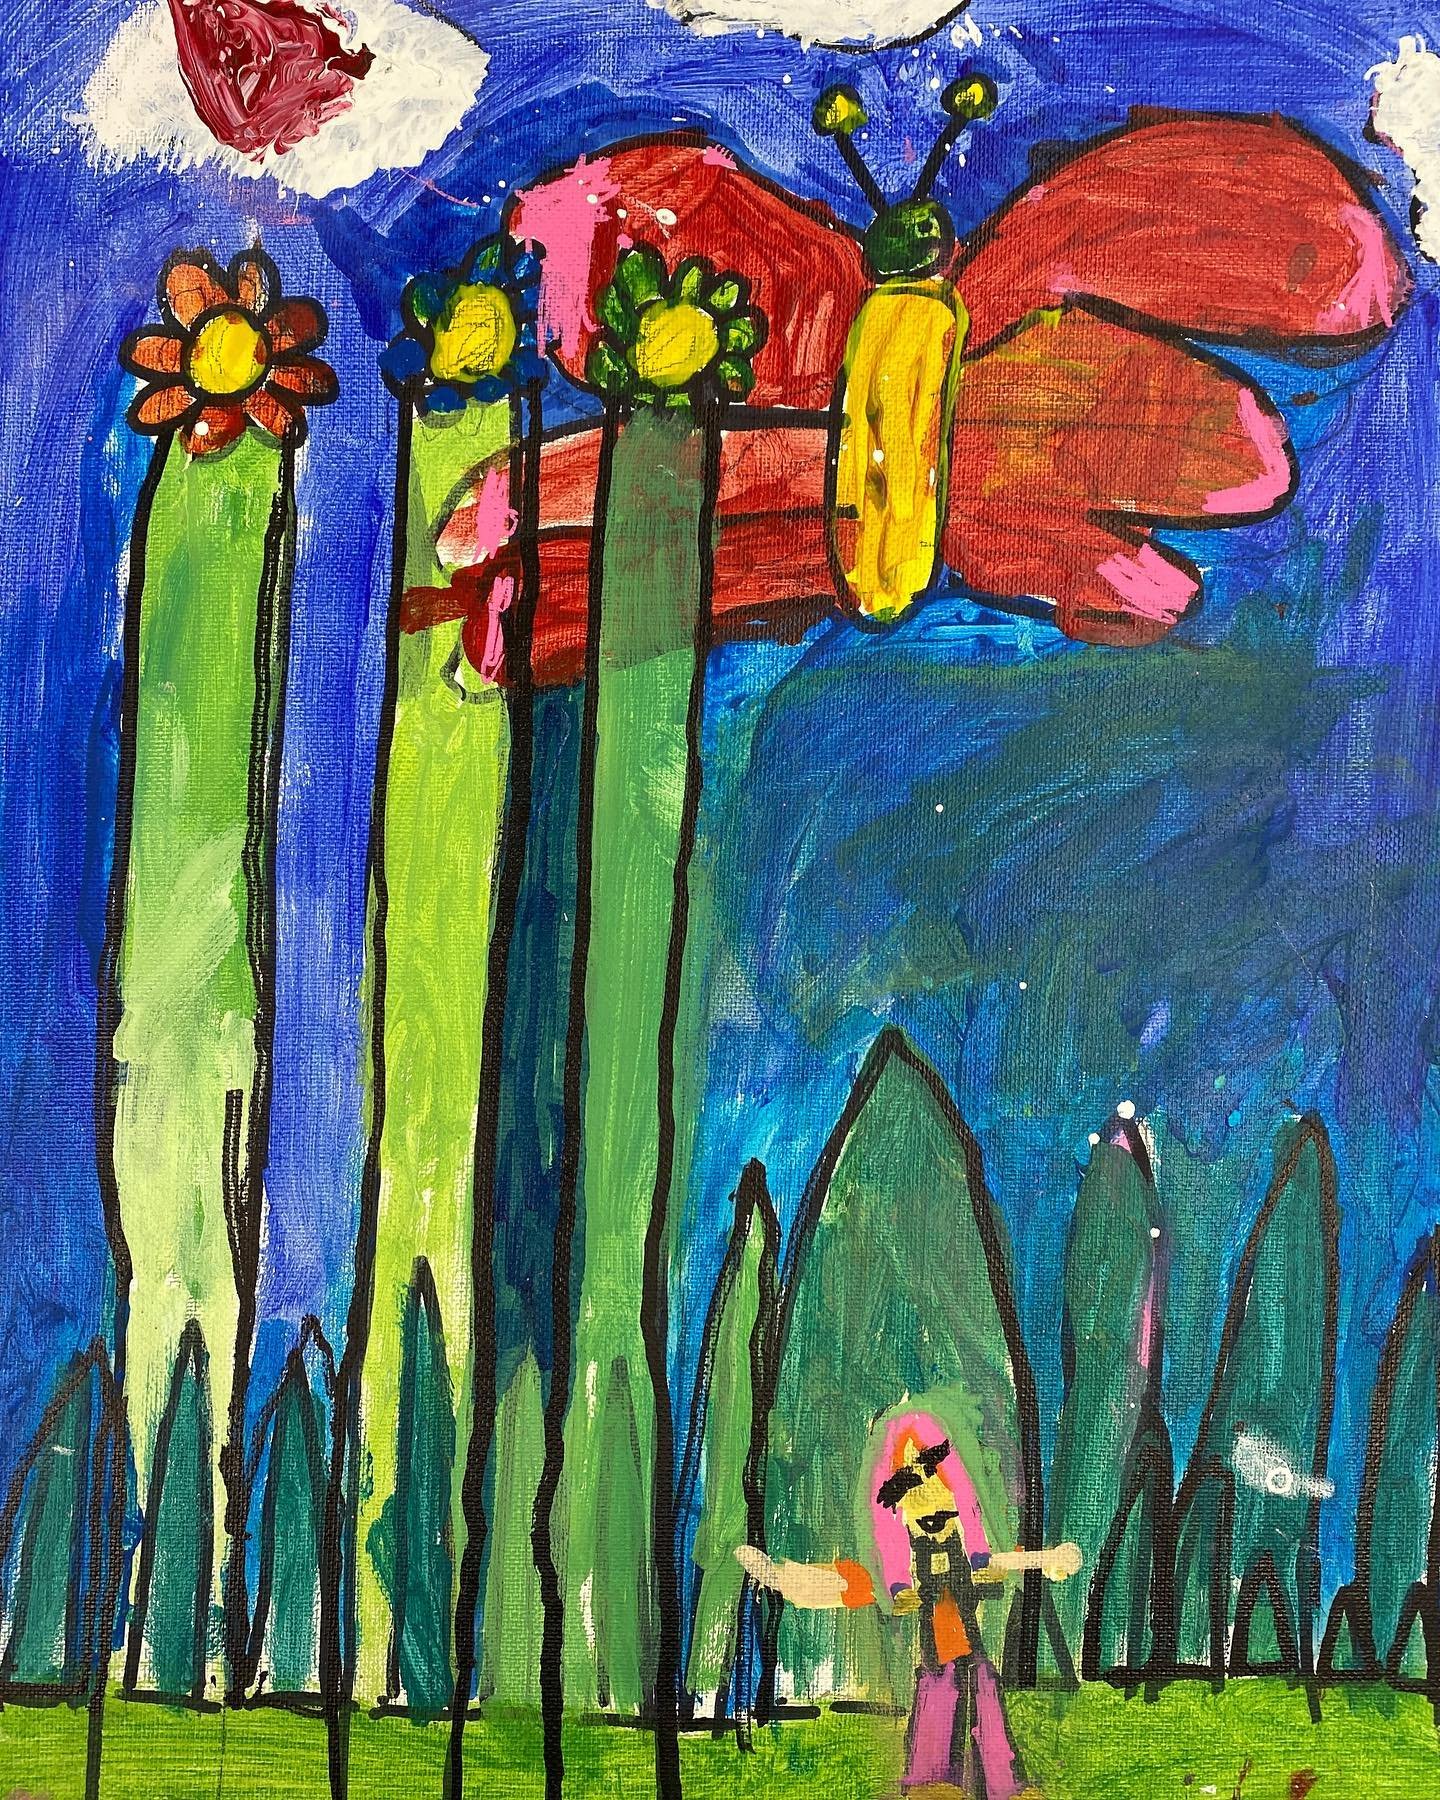 &ldquo;The Earth is&hellip; really big!&rdquo; painting by a second grader